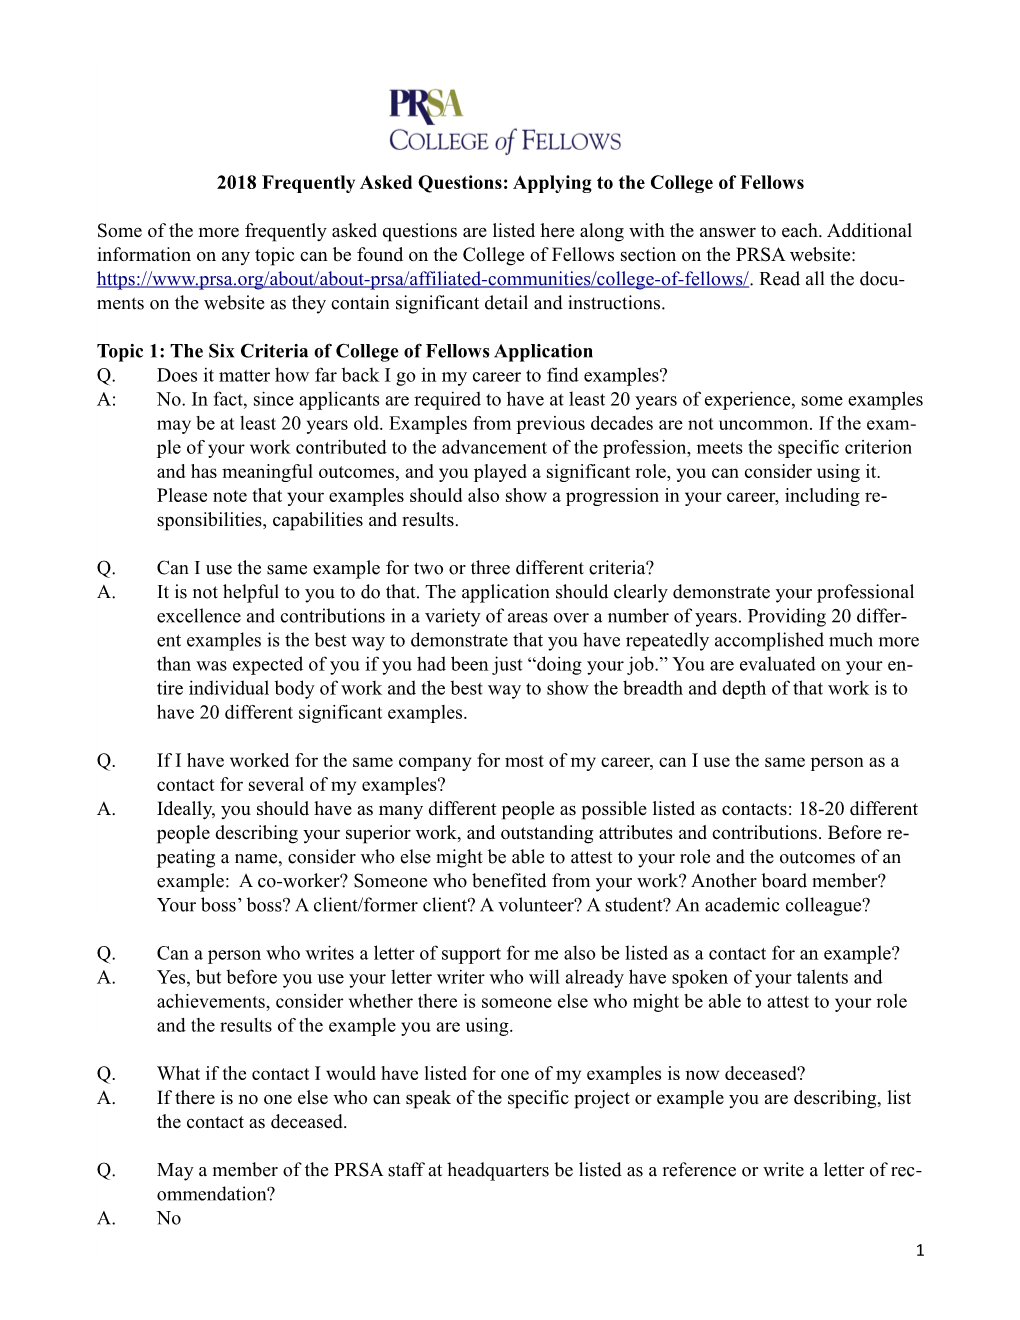 Topic 1: the Six Criteria of College of Fellows Application